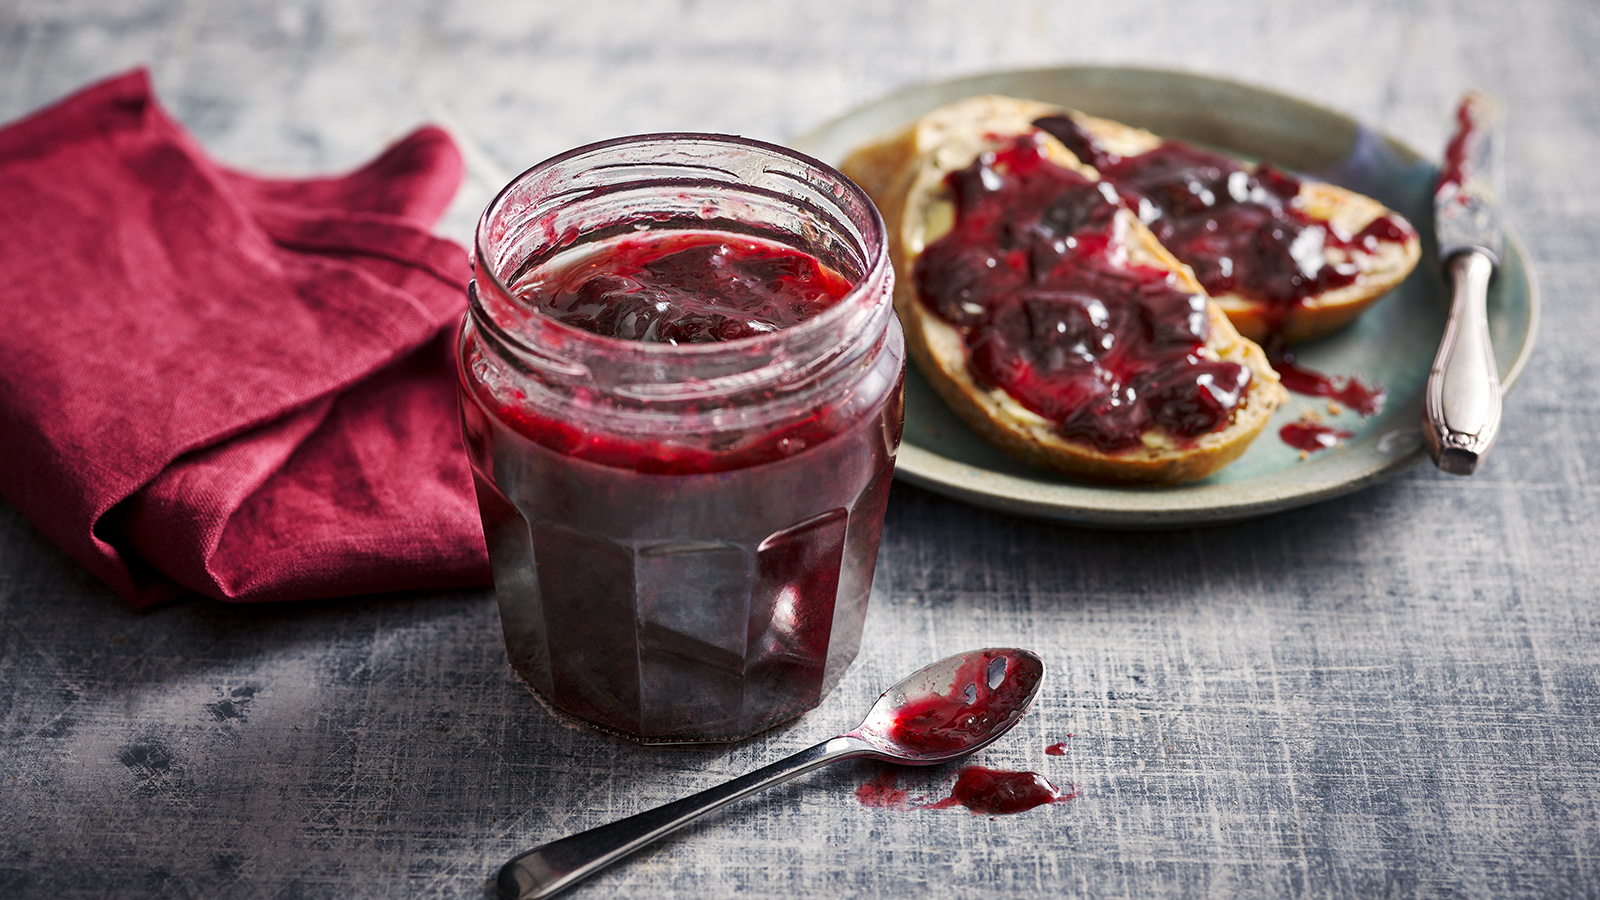 10-Minute Chia Seed Jam - Gimme Some Oven